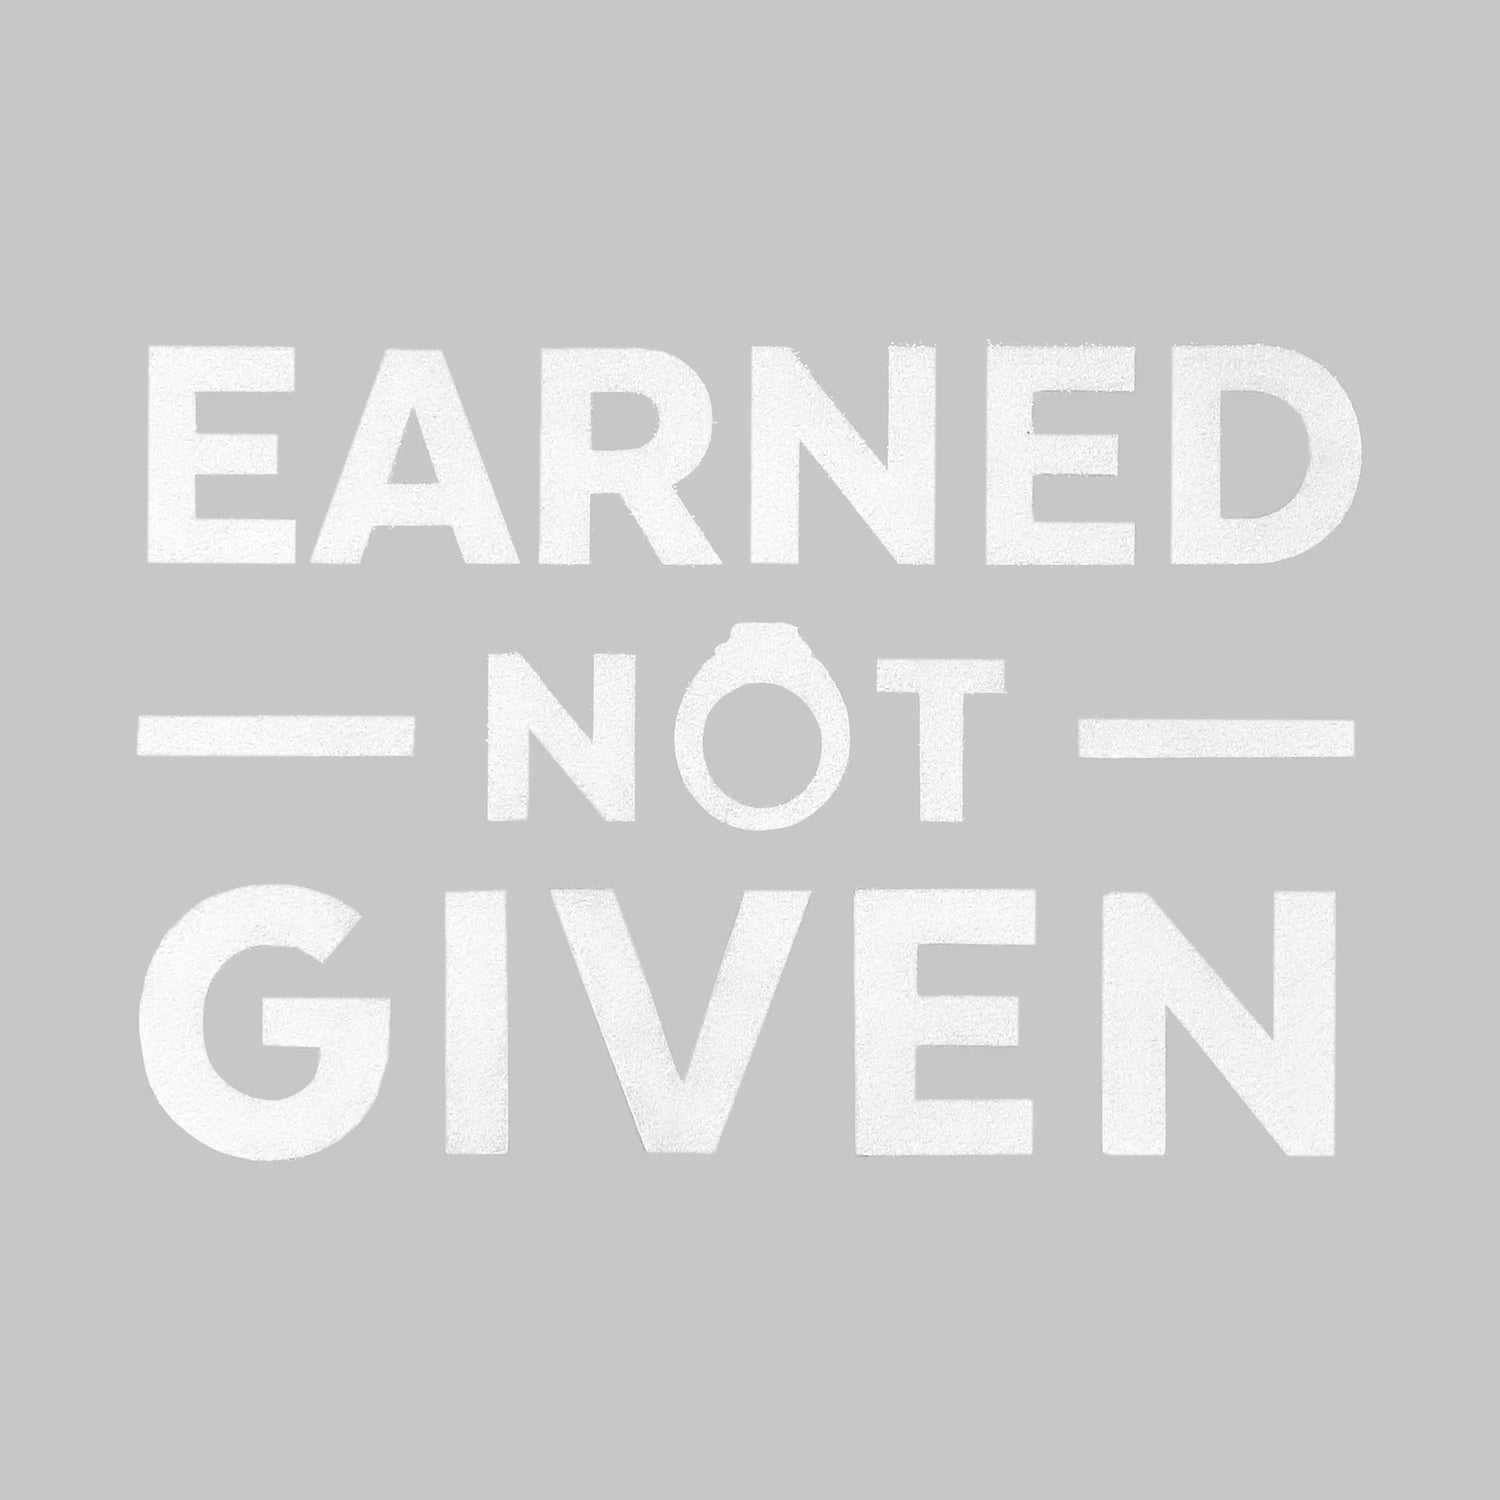 Earned Not Given Vinyl Decal